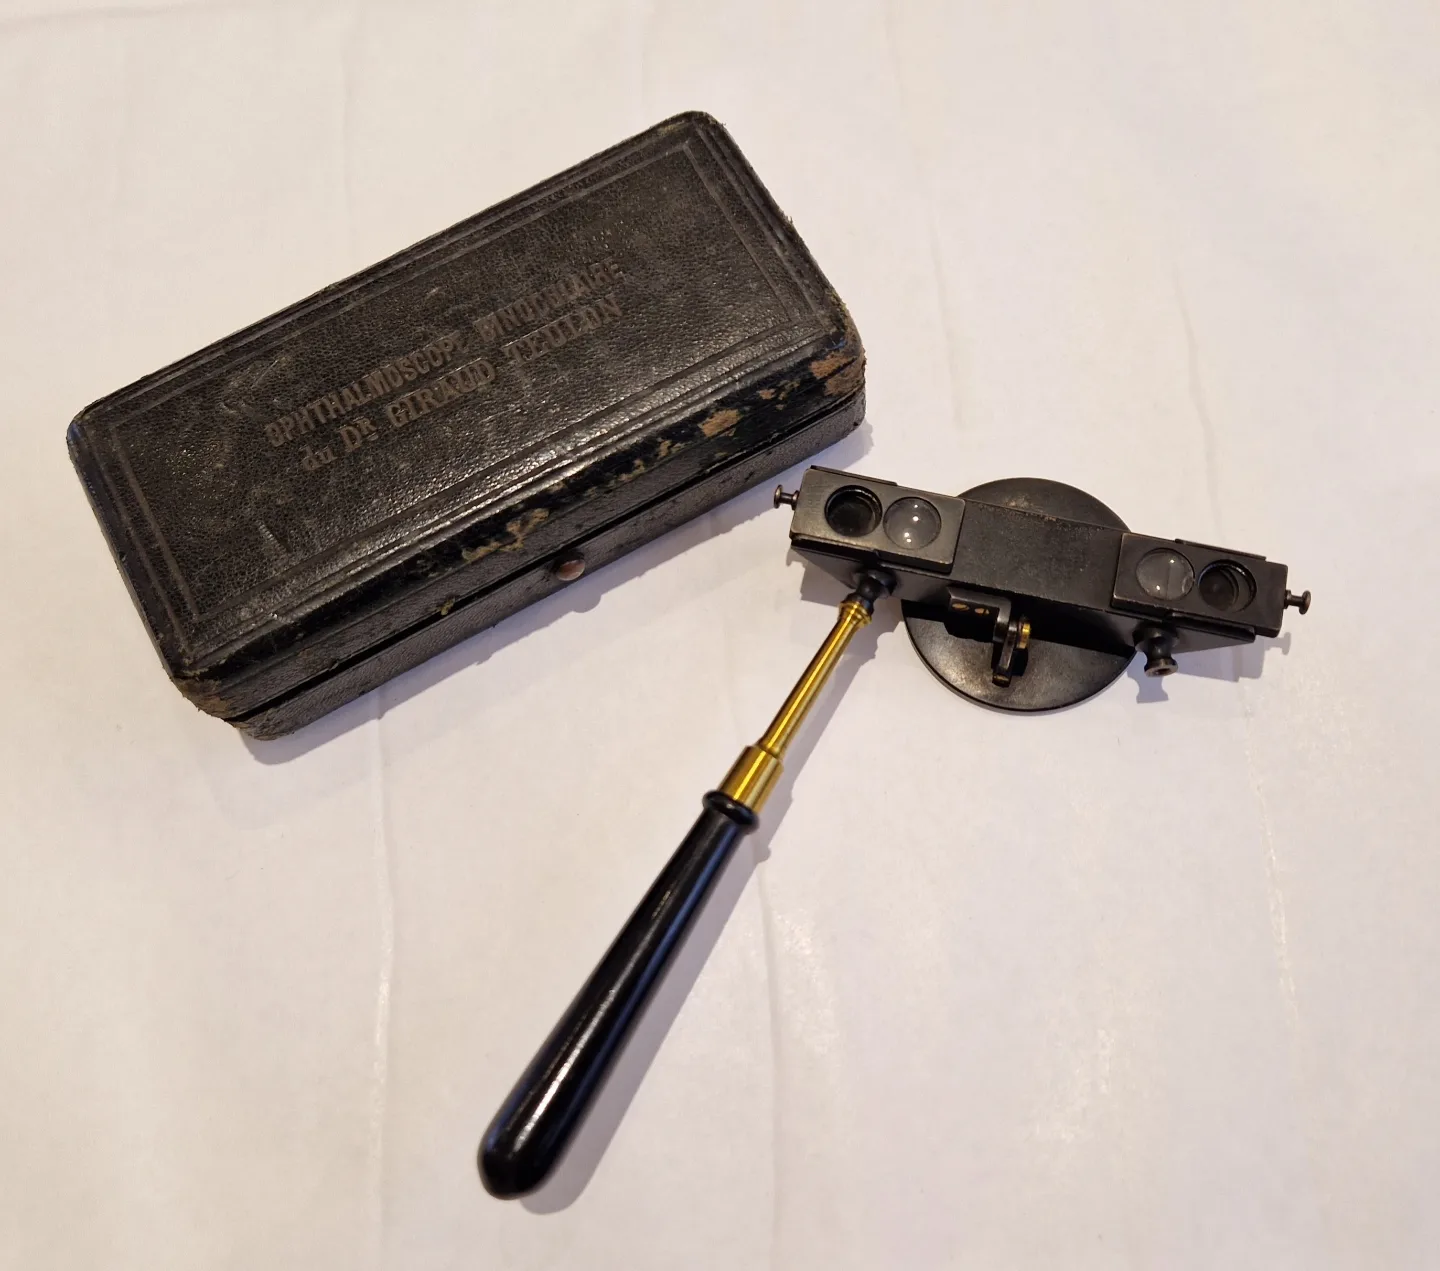 The rare first first binocular ophthalmoscope after Giraud-Teulon